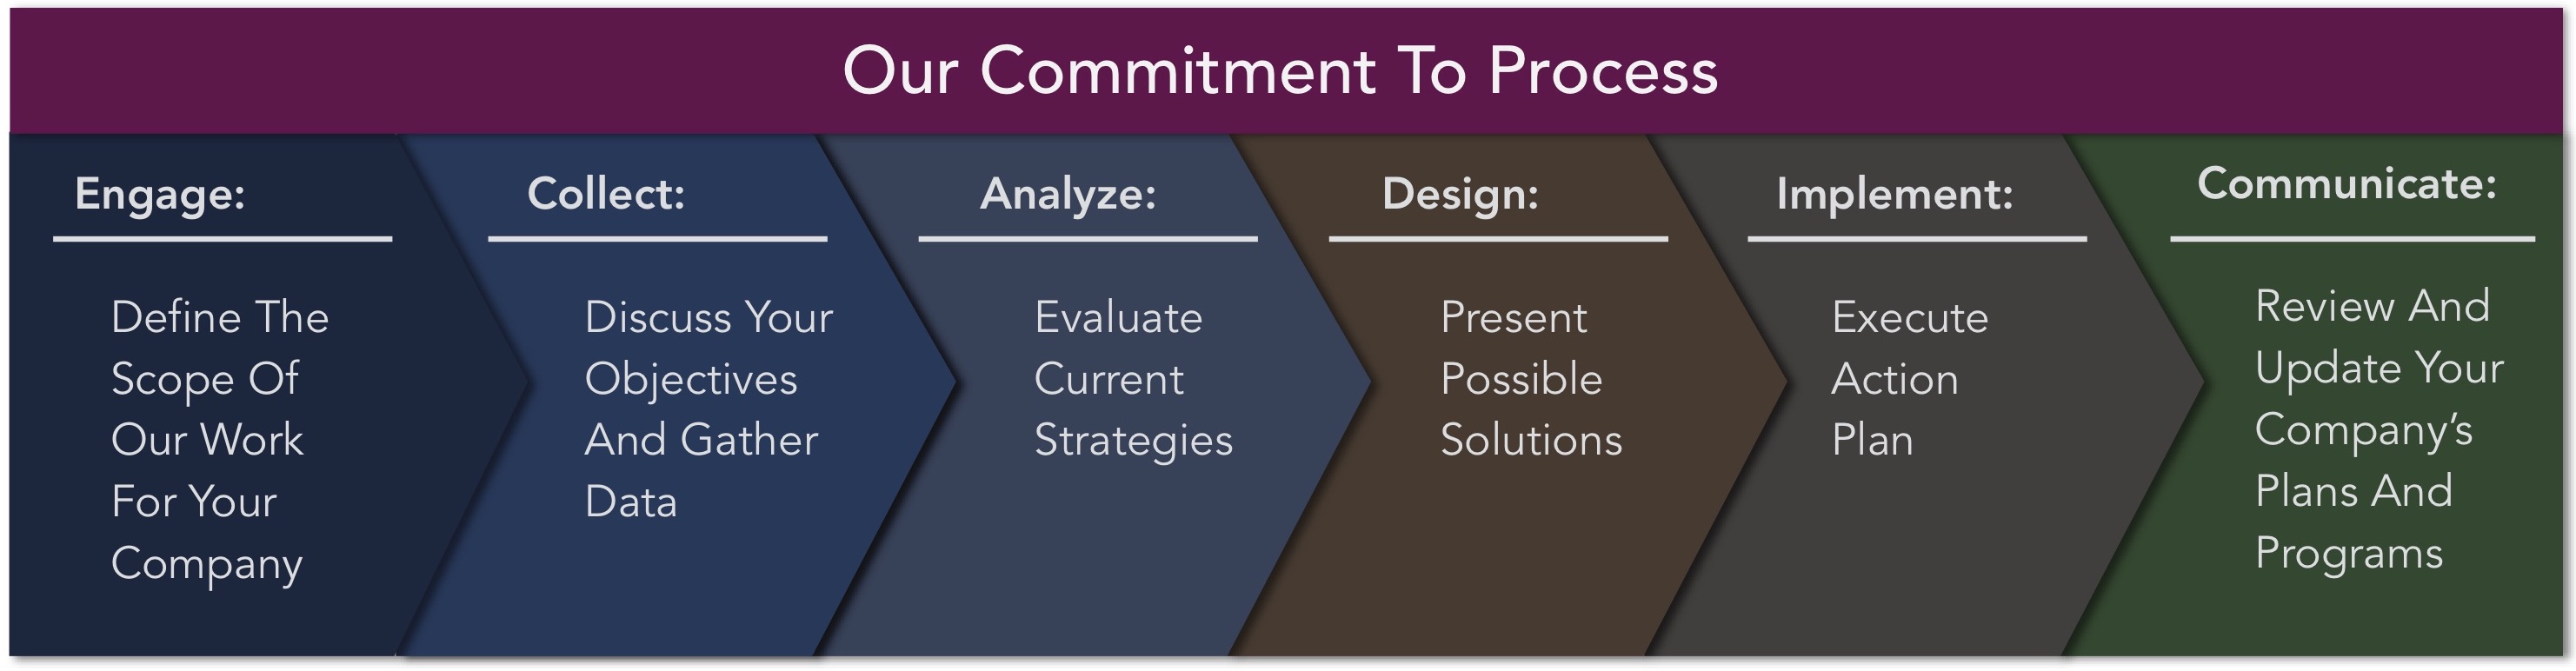 Our Commitment to Process